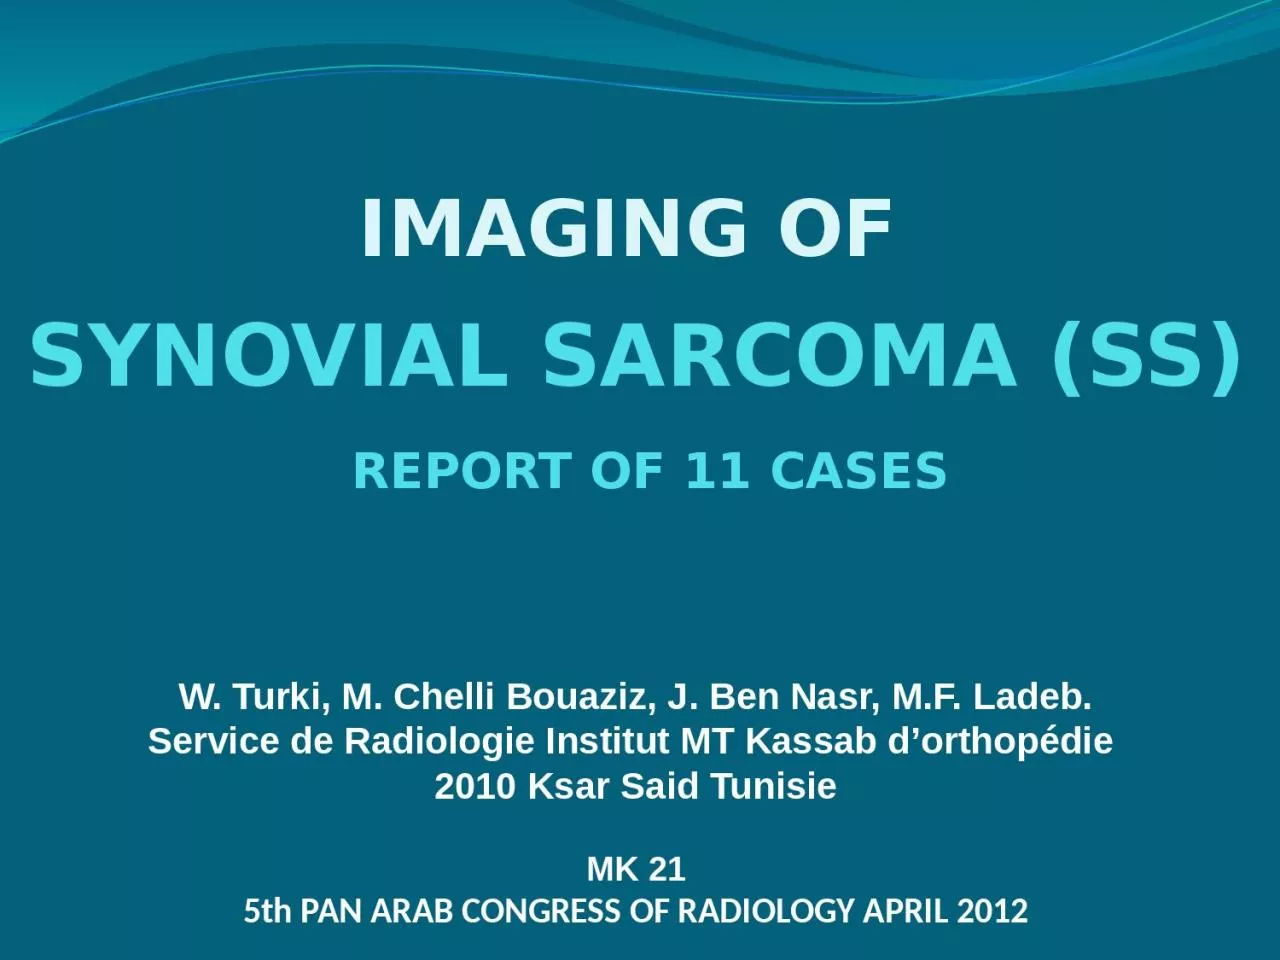 SYNOVIAL SARCOMA (SS)   REPORT OF 11 CASES